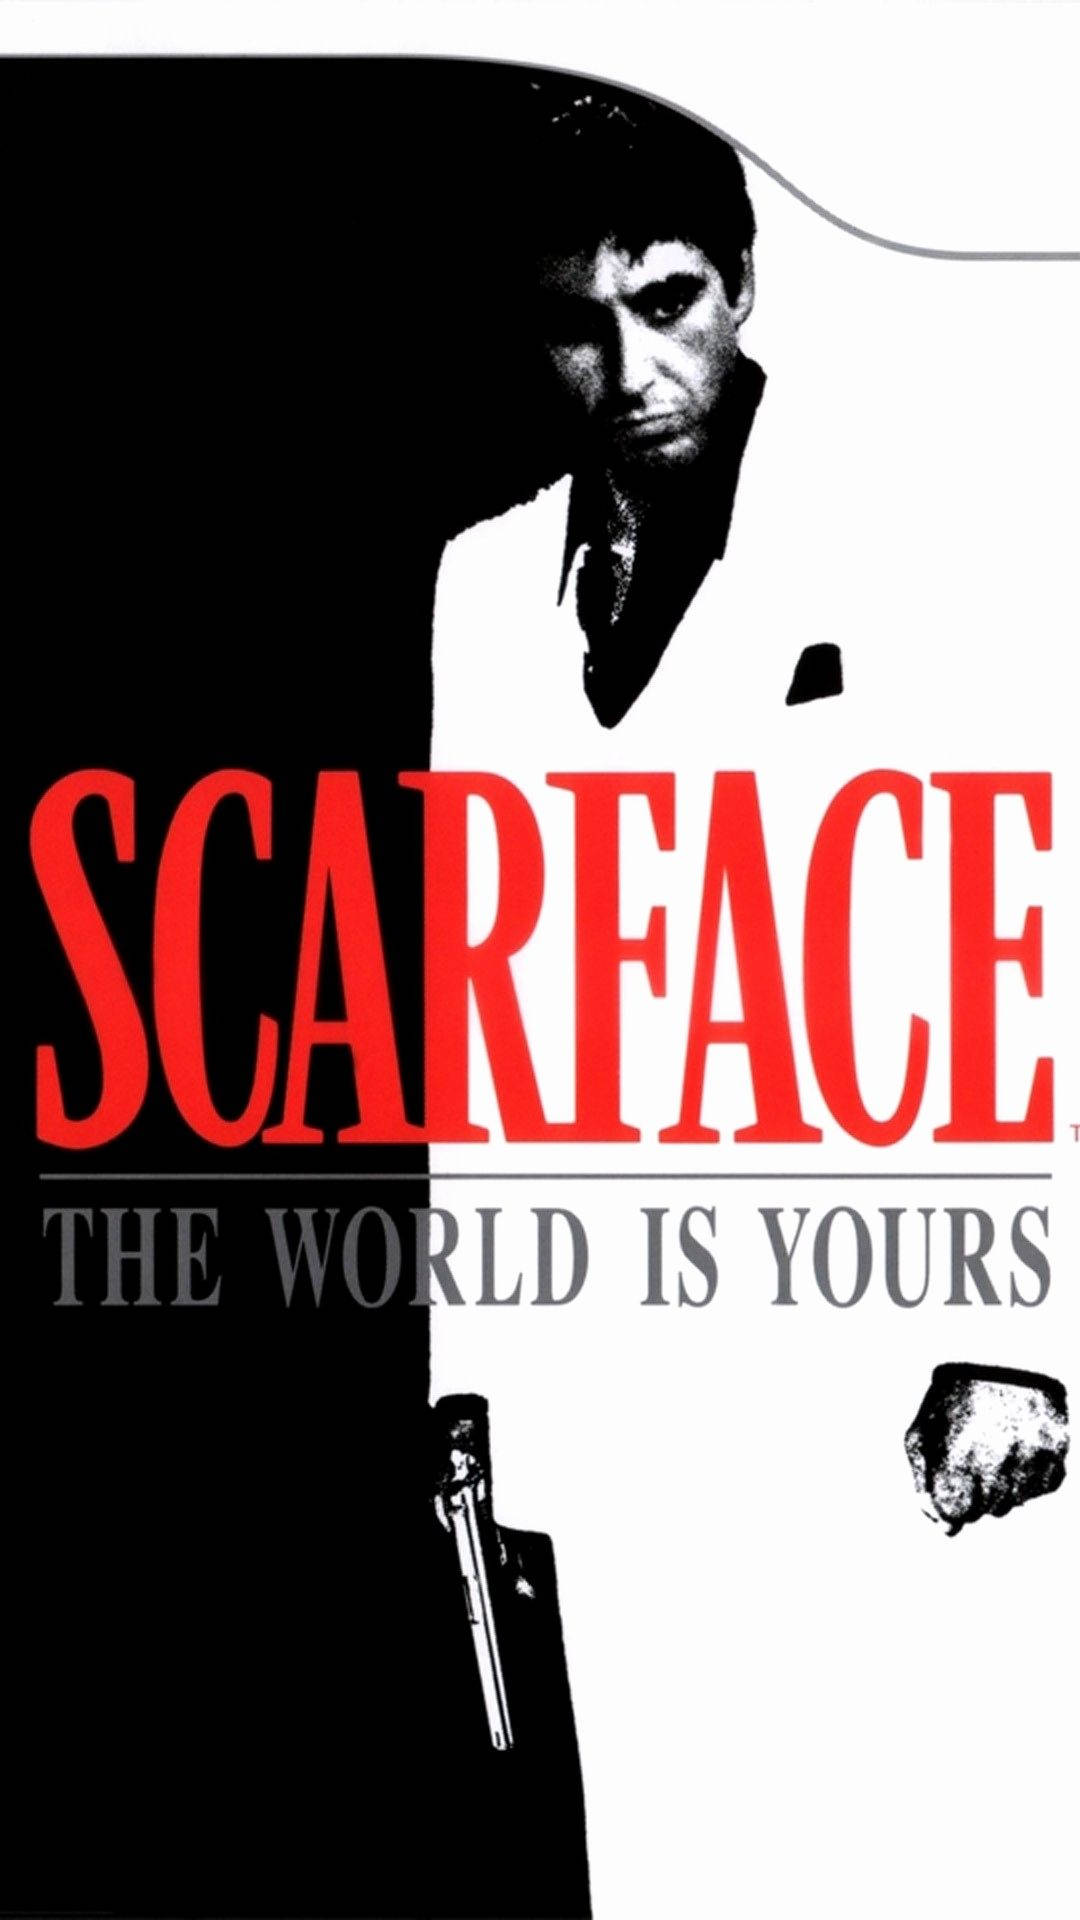 Scarface The World Is Yours Ps3 Wallpaper